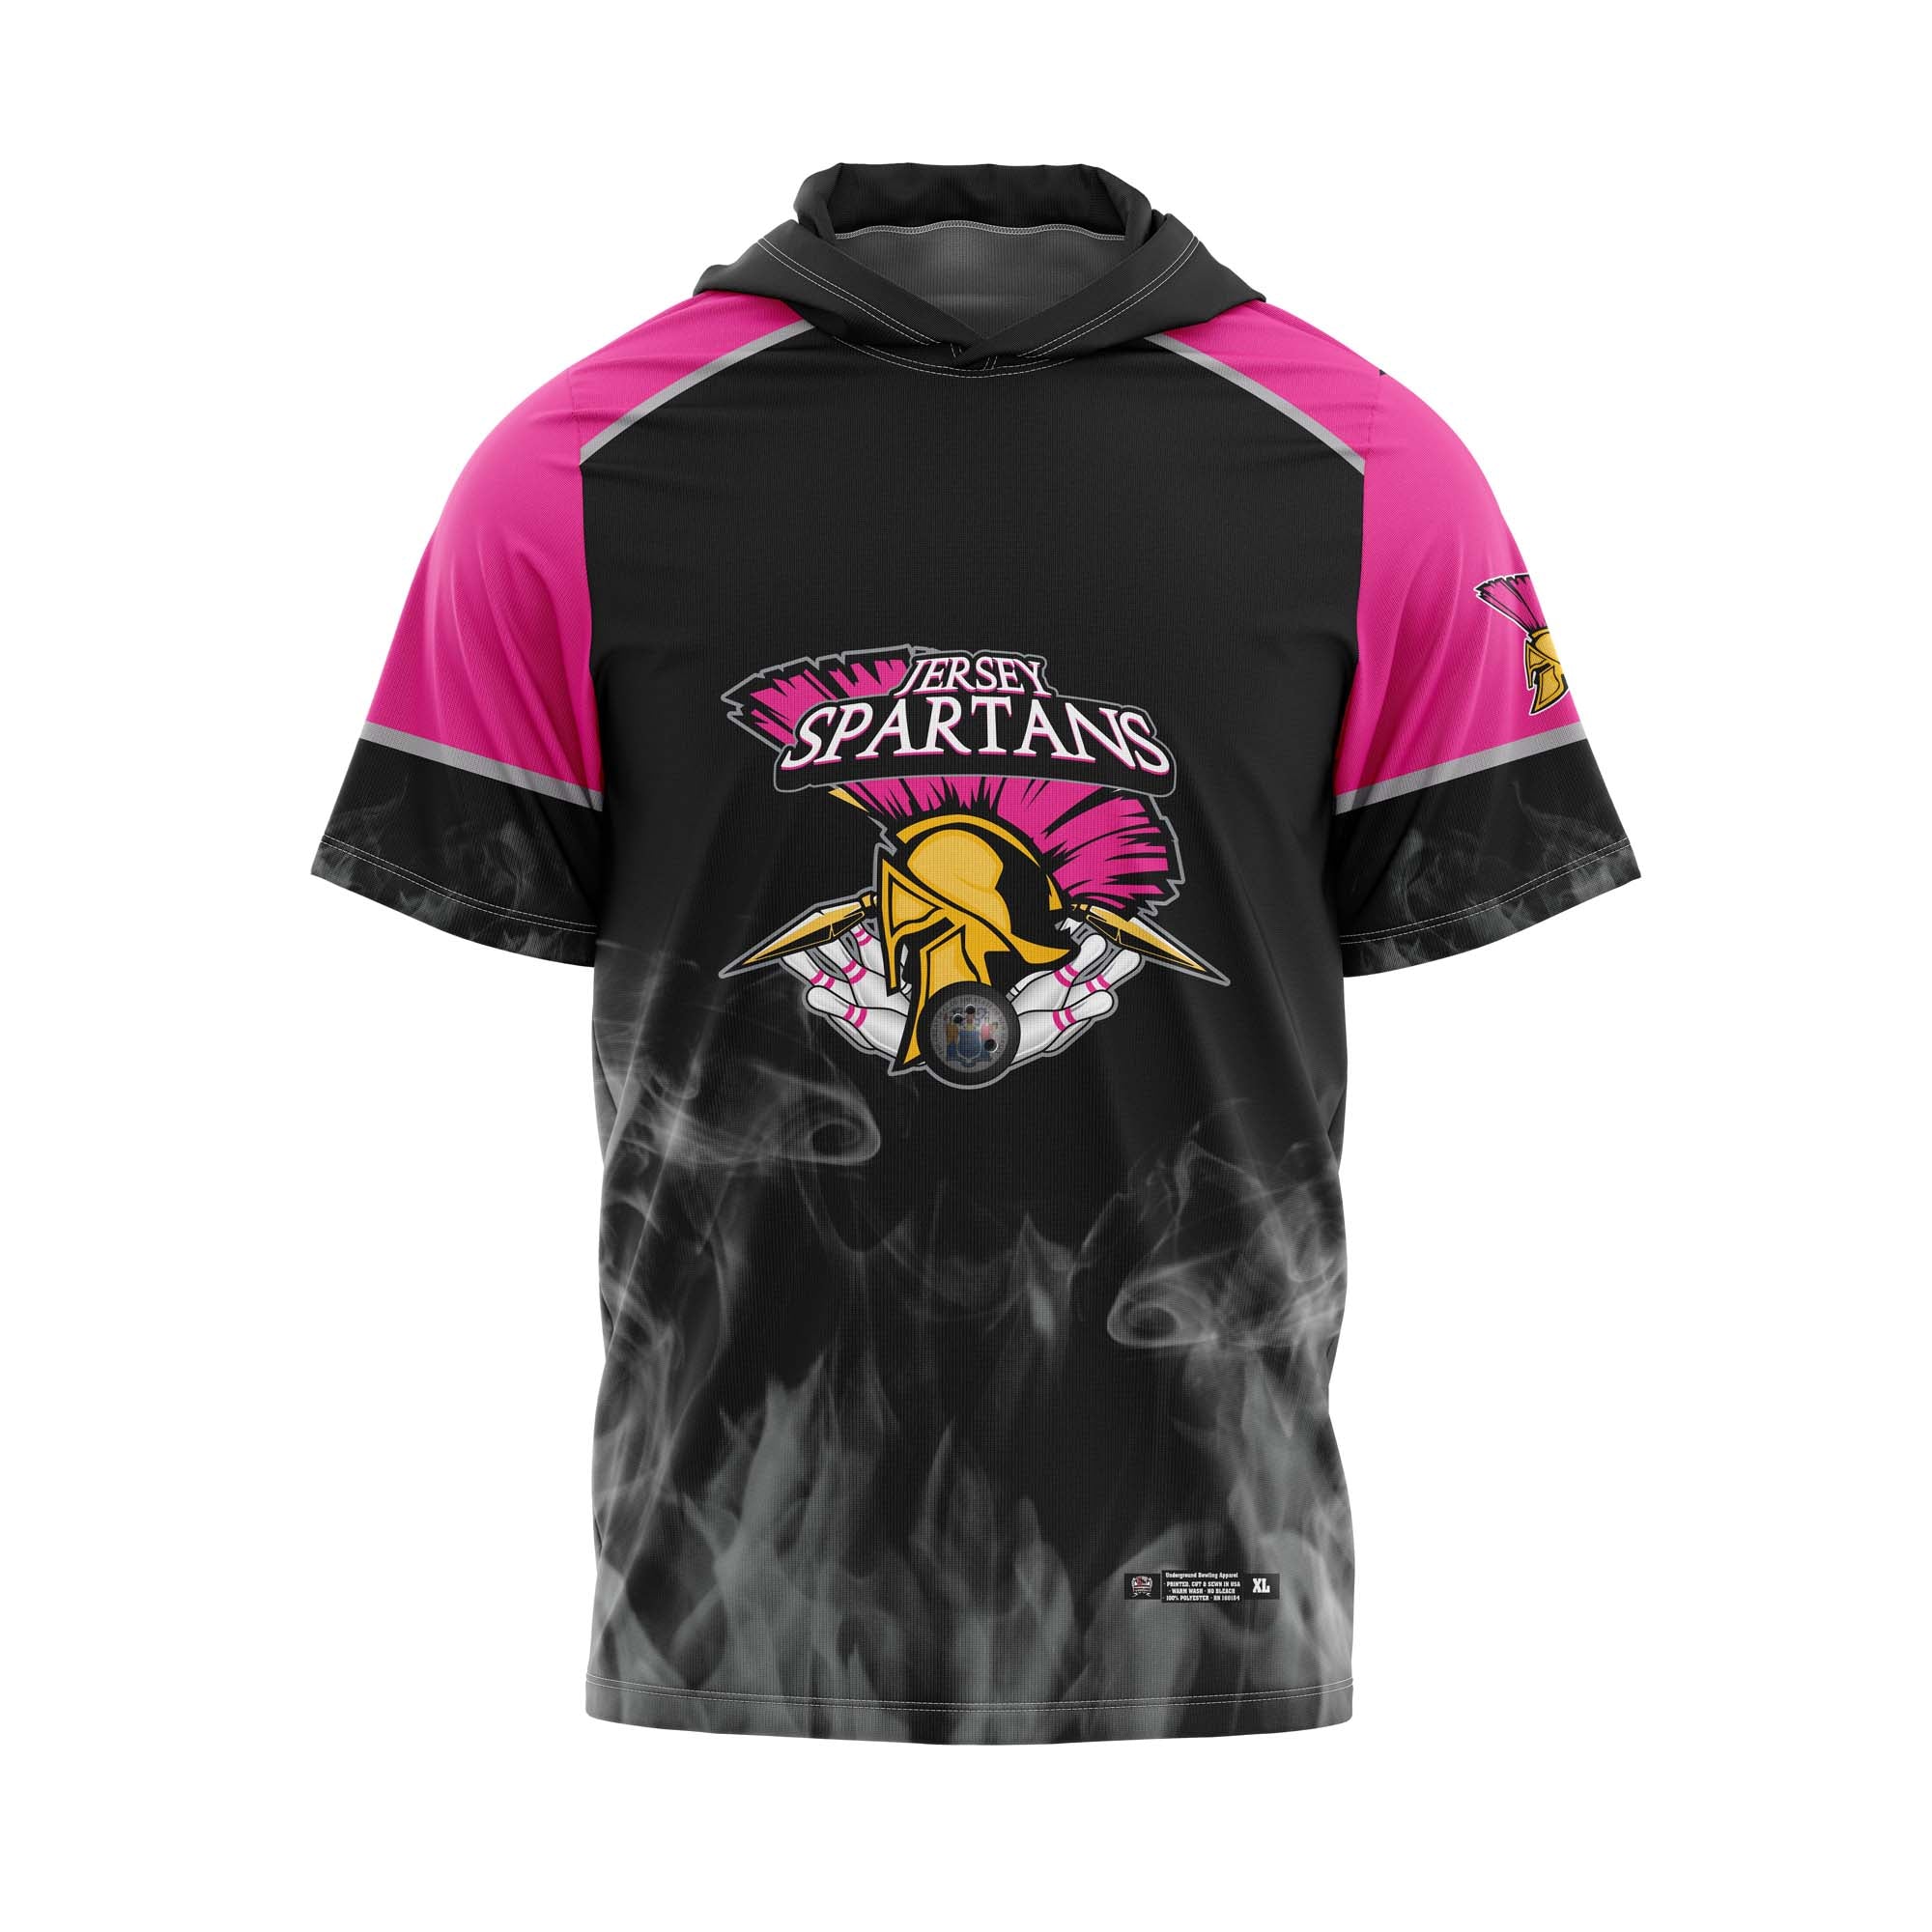 Jersey Spartans Breast Cancer Jersey